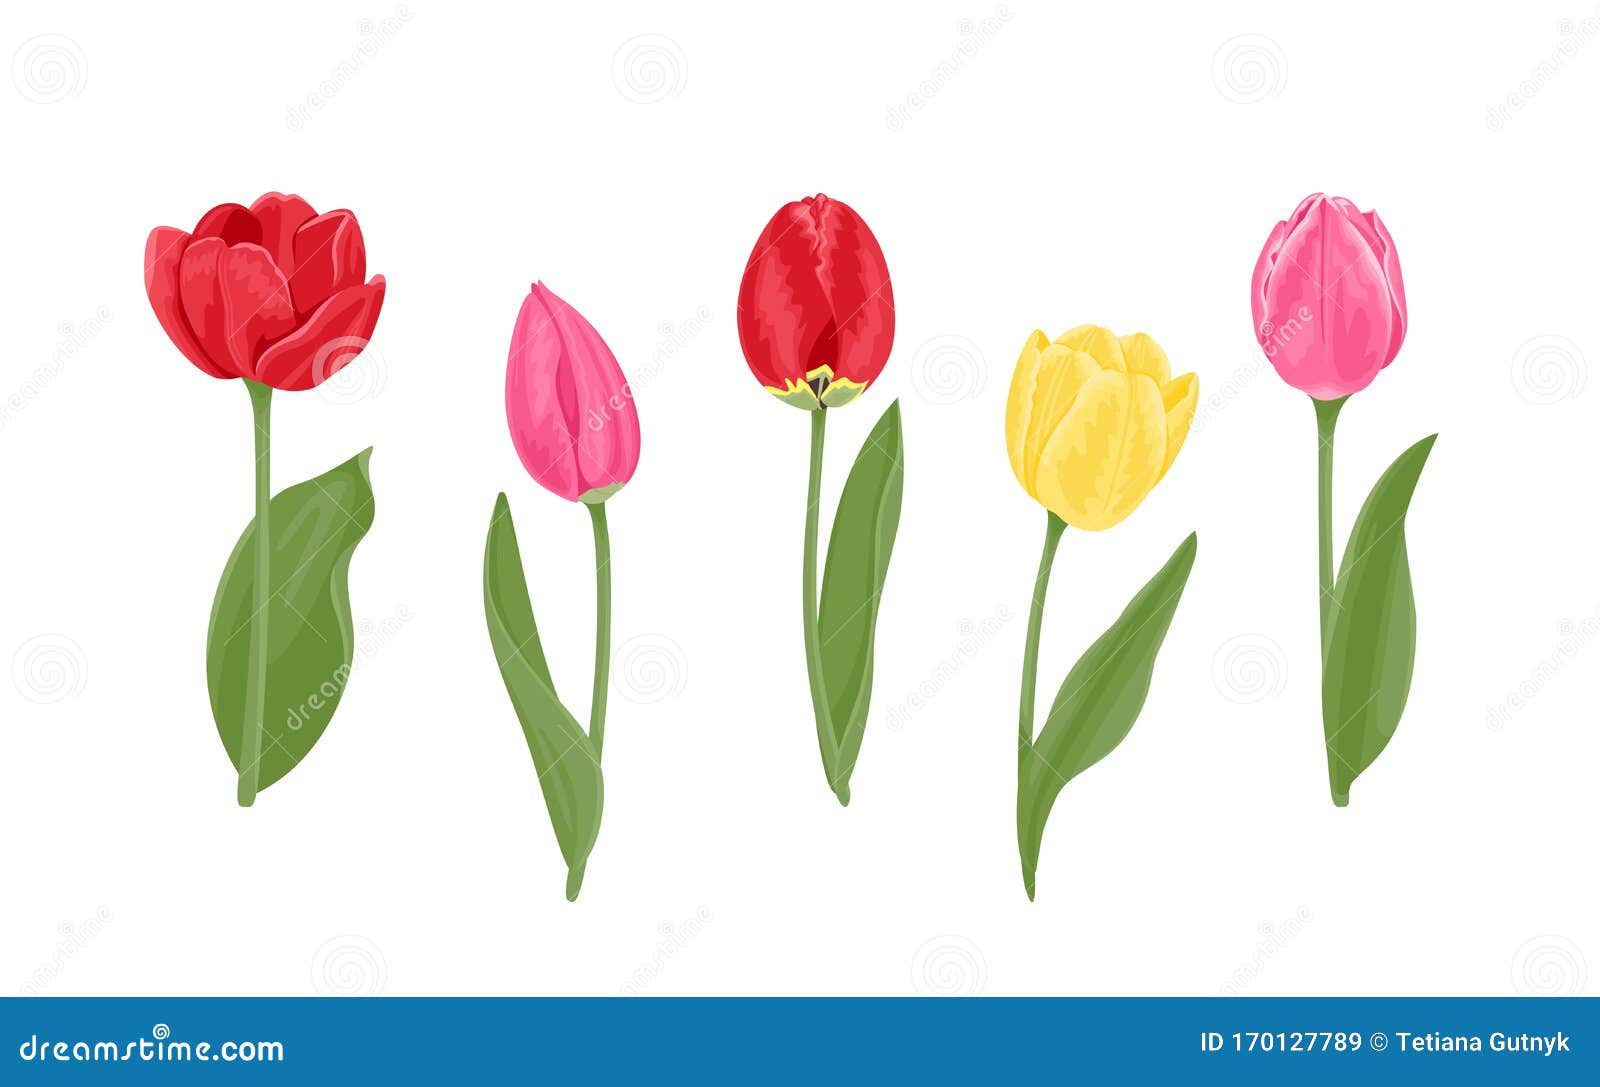 Set of Tulips in Different Colors and Shapes. Yellow, Red and Pink ...